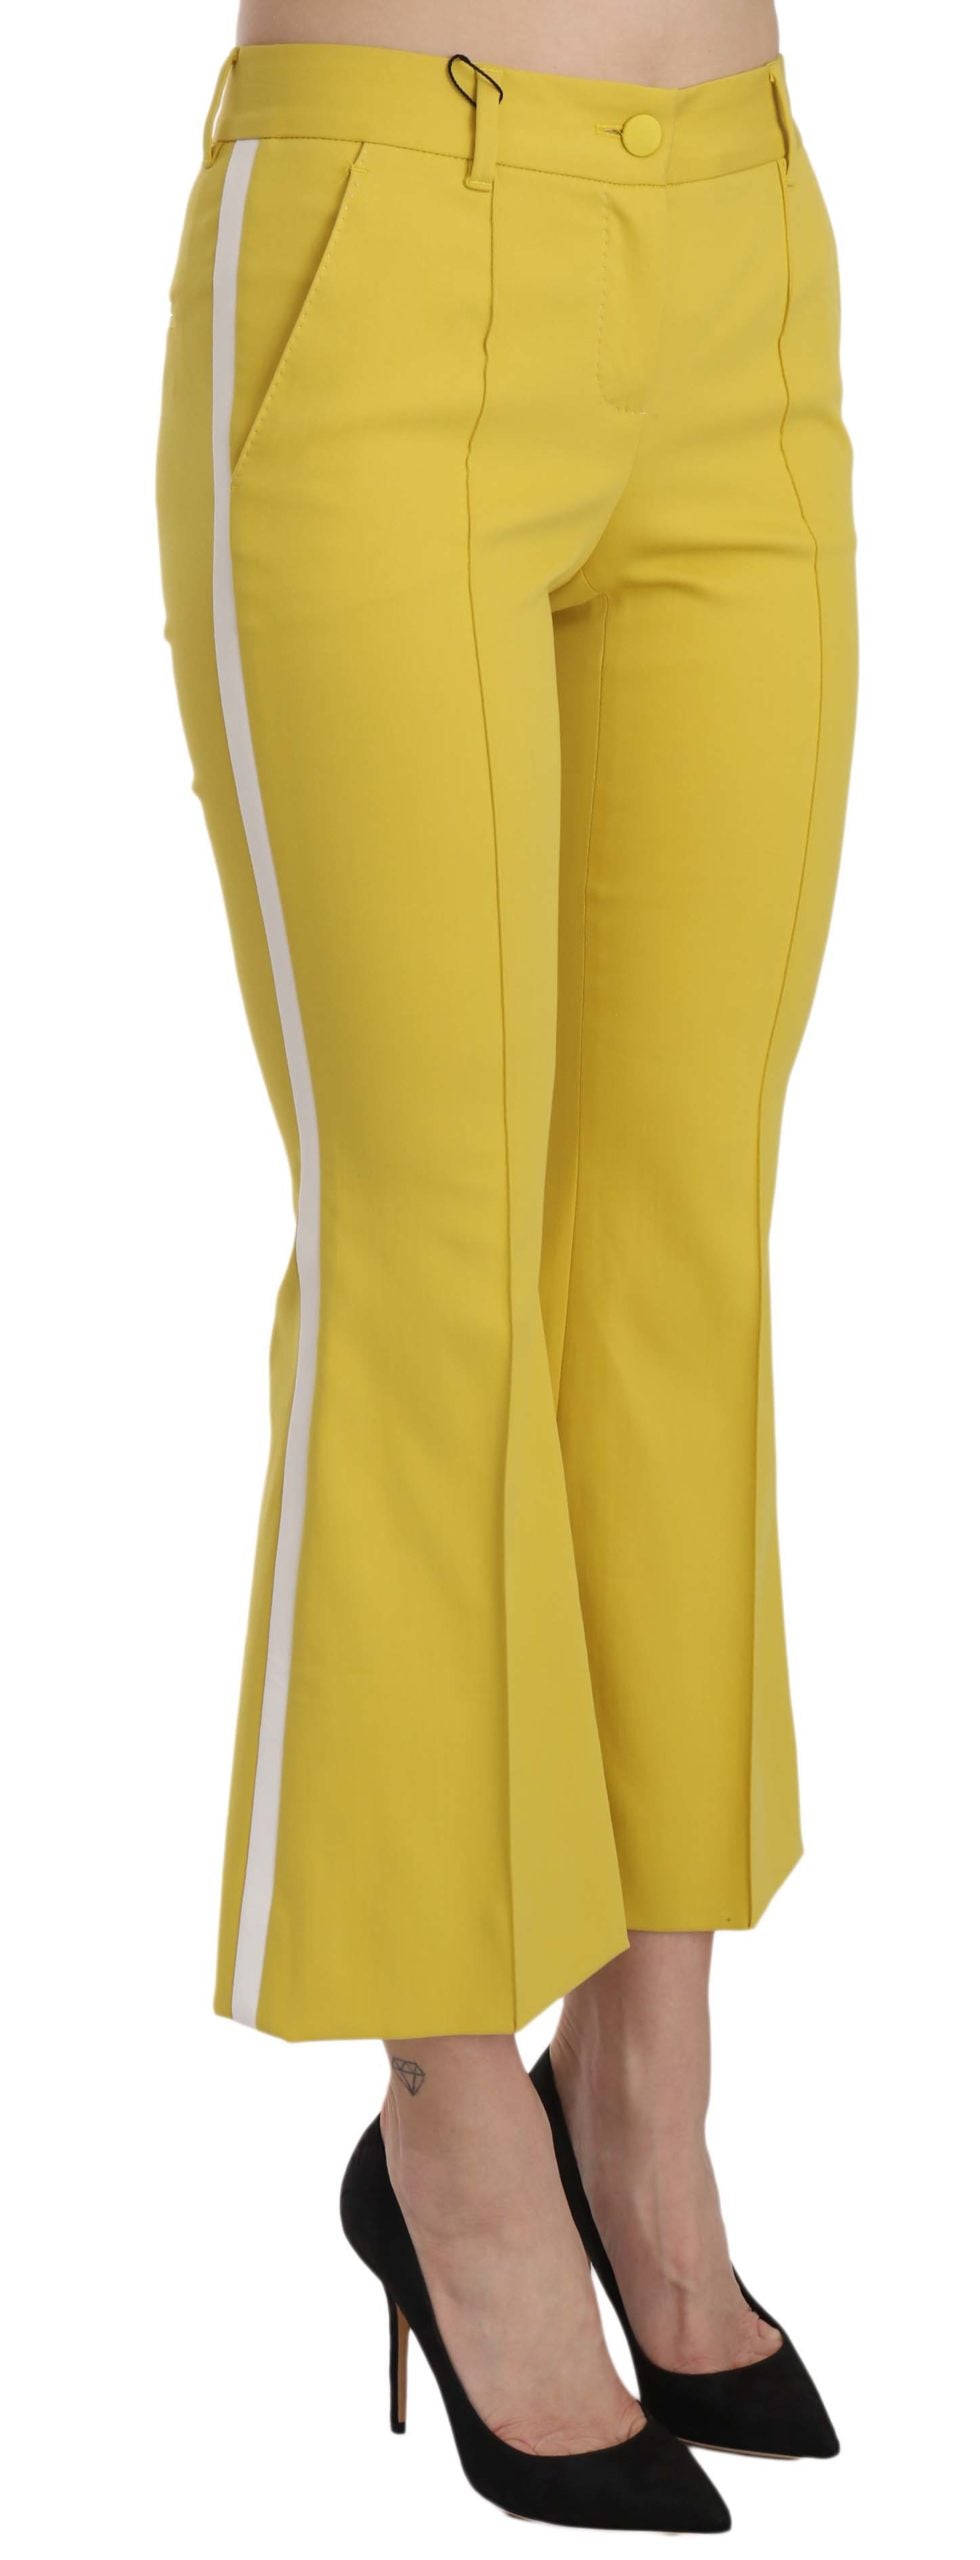 Dolce & Gabbana Chic Yellow Flare Pants for Elegant Evenings.